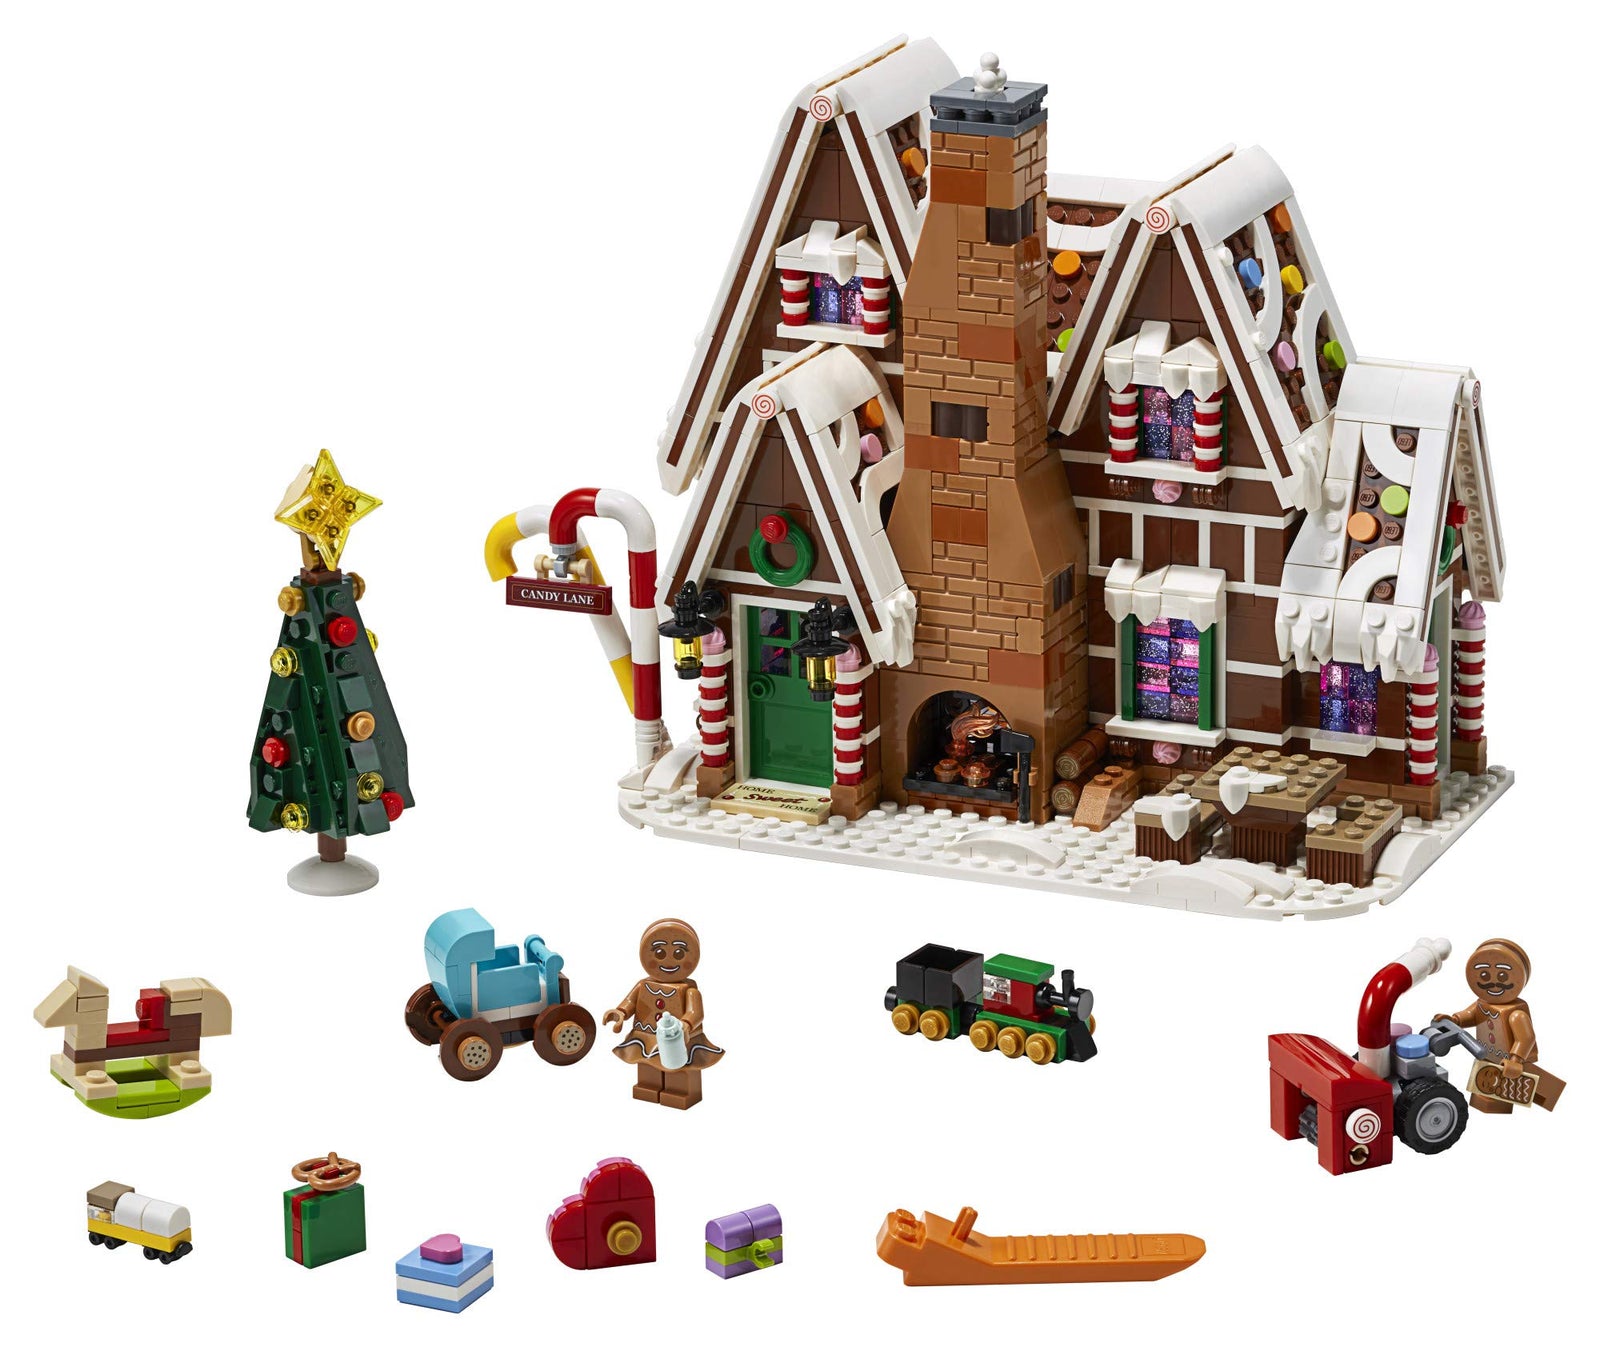 LEGO Creator Expert Gingerbread House 10267 Building Kit (1,477 Pieces)